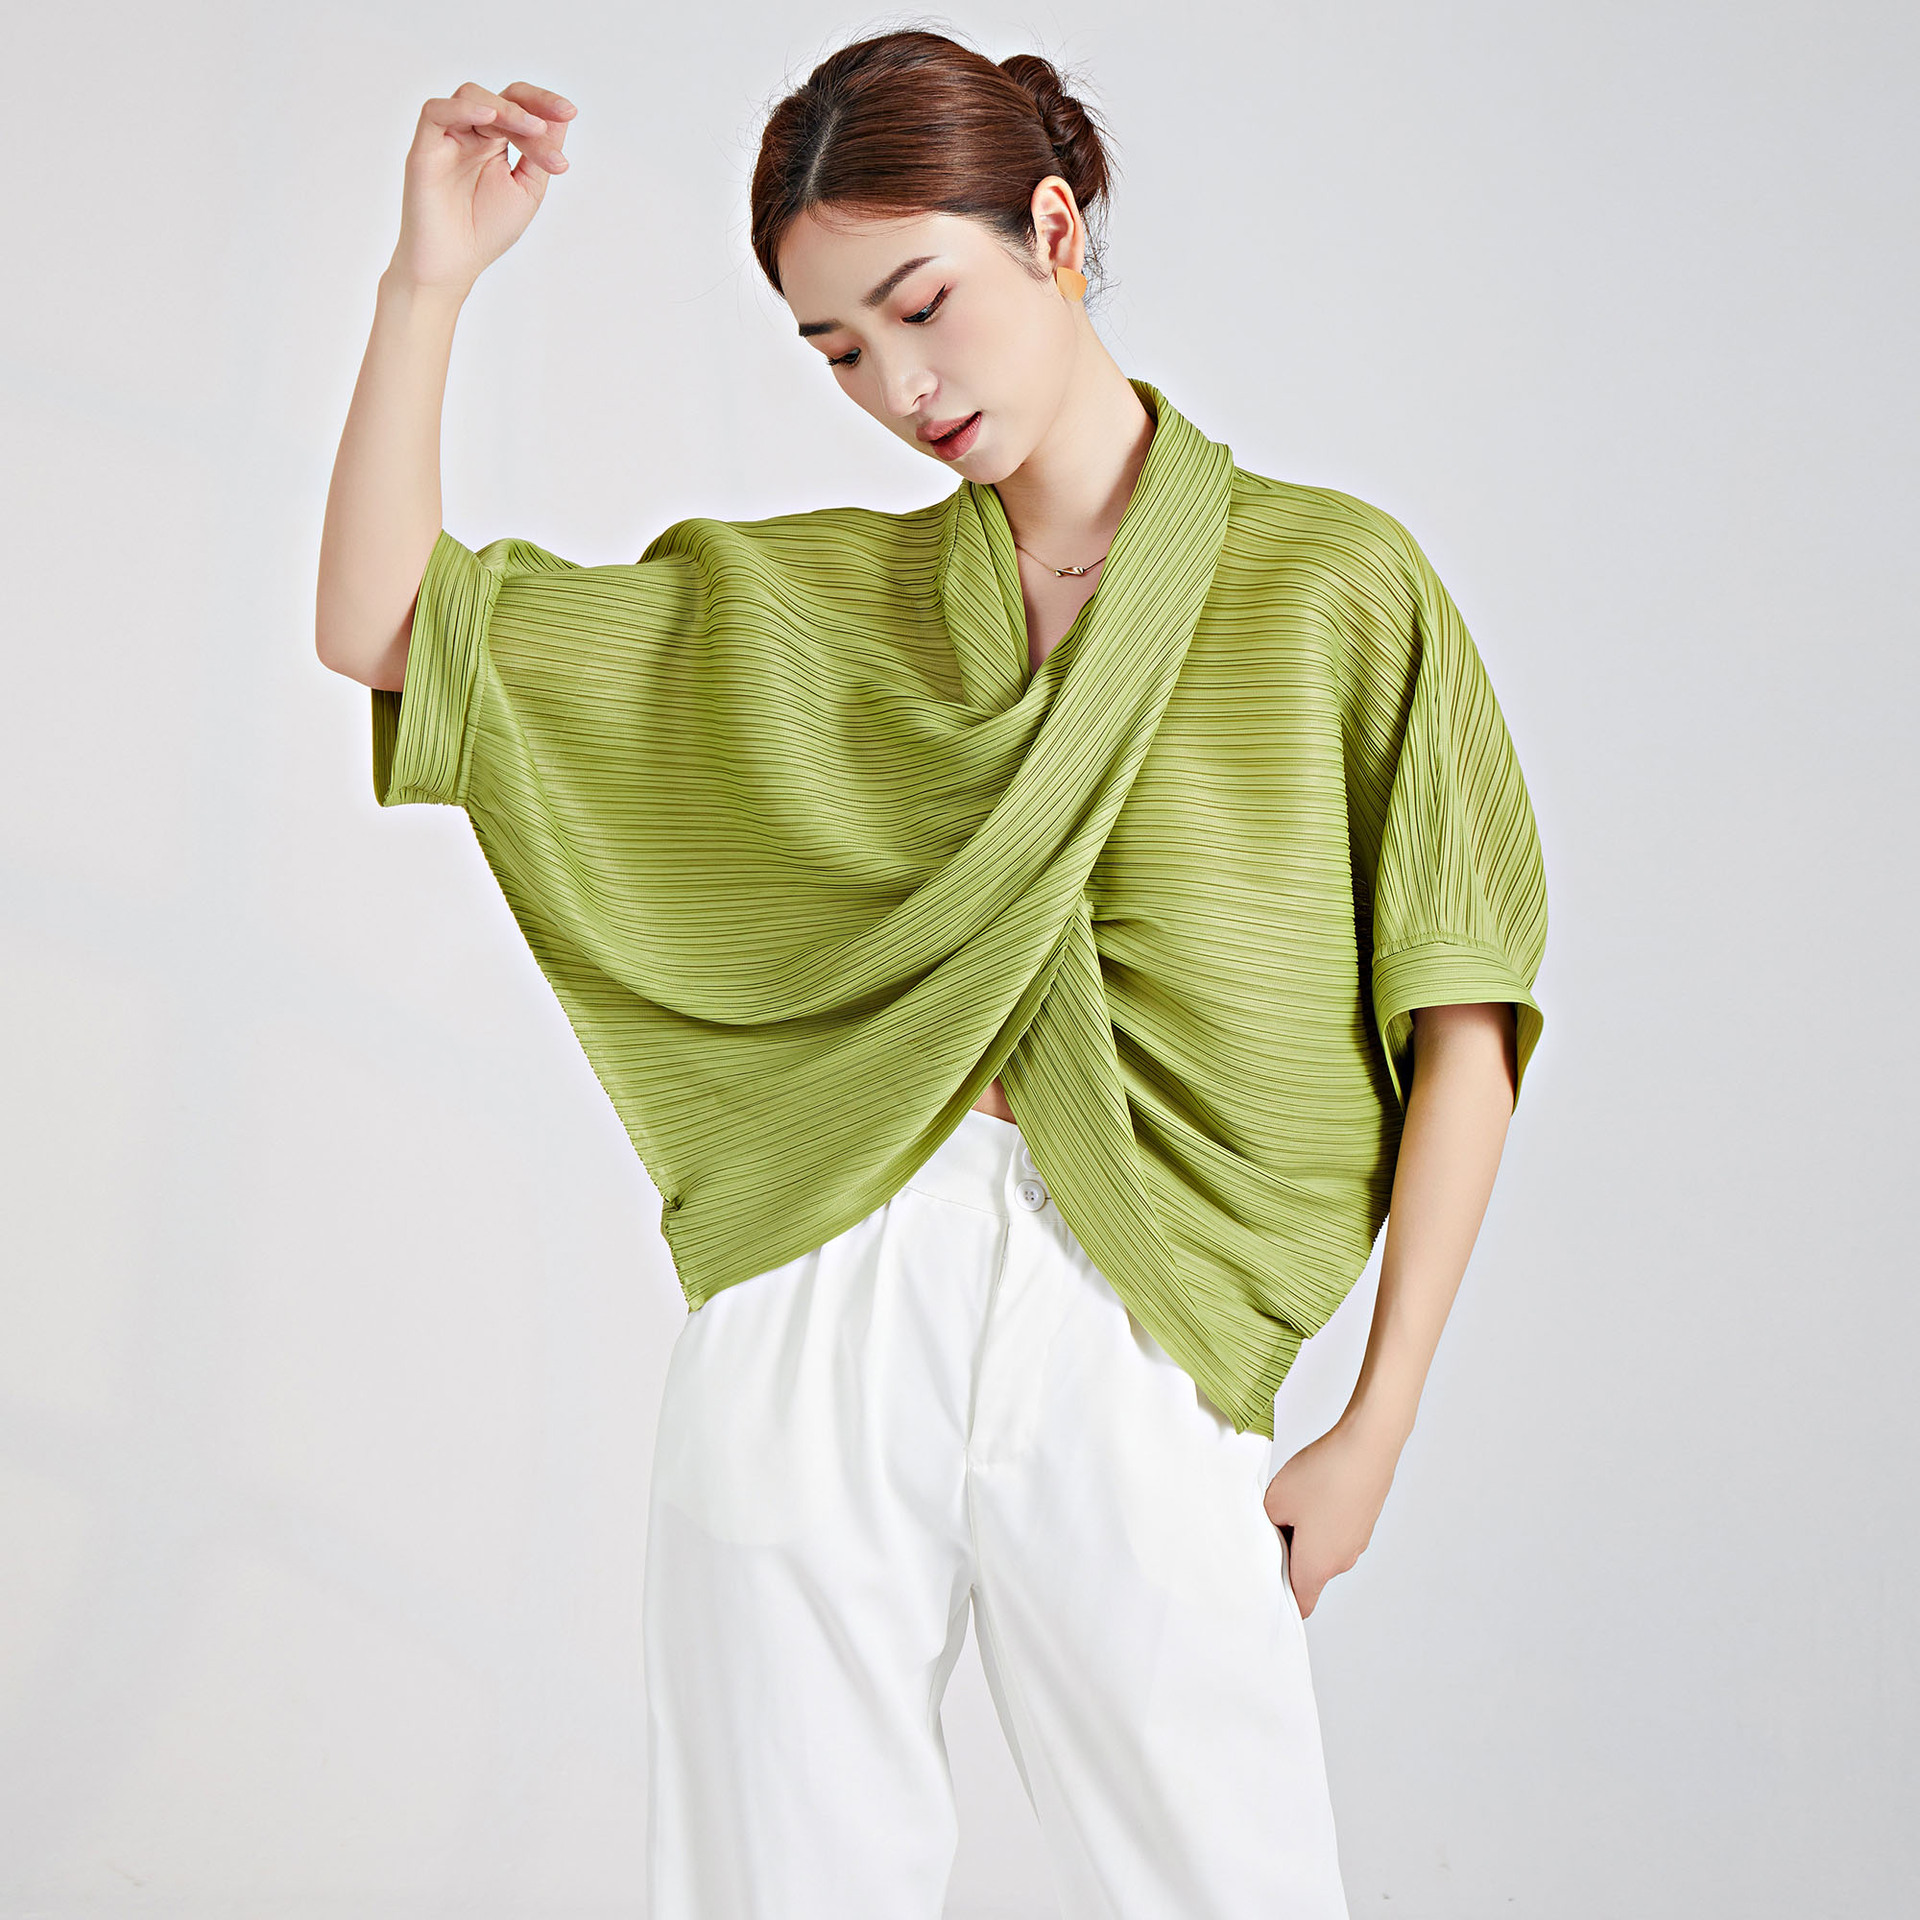 Embrace Contemporary Chic lady's fashion Fashion Tops Classic Tops with a Modern Twist